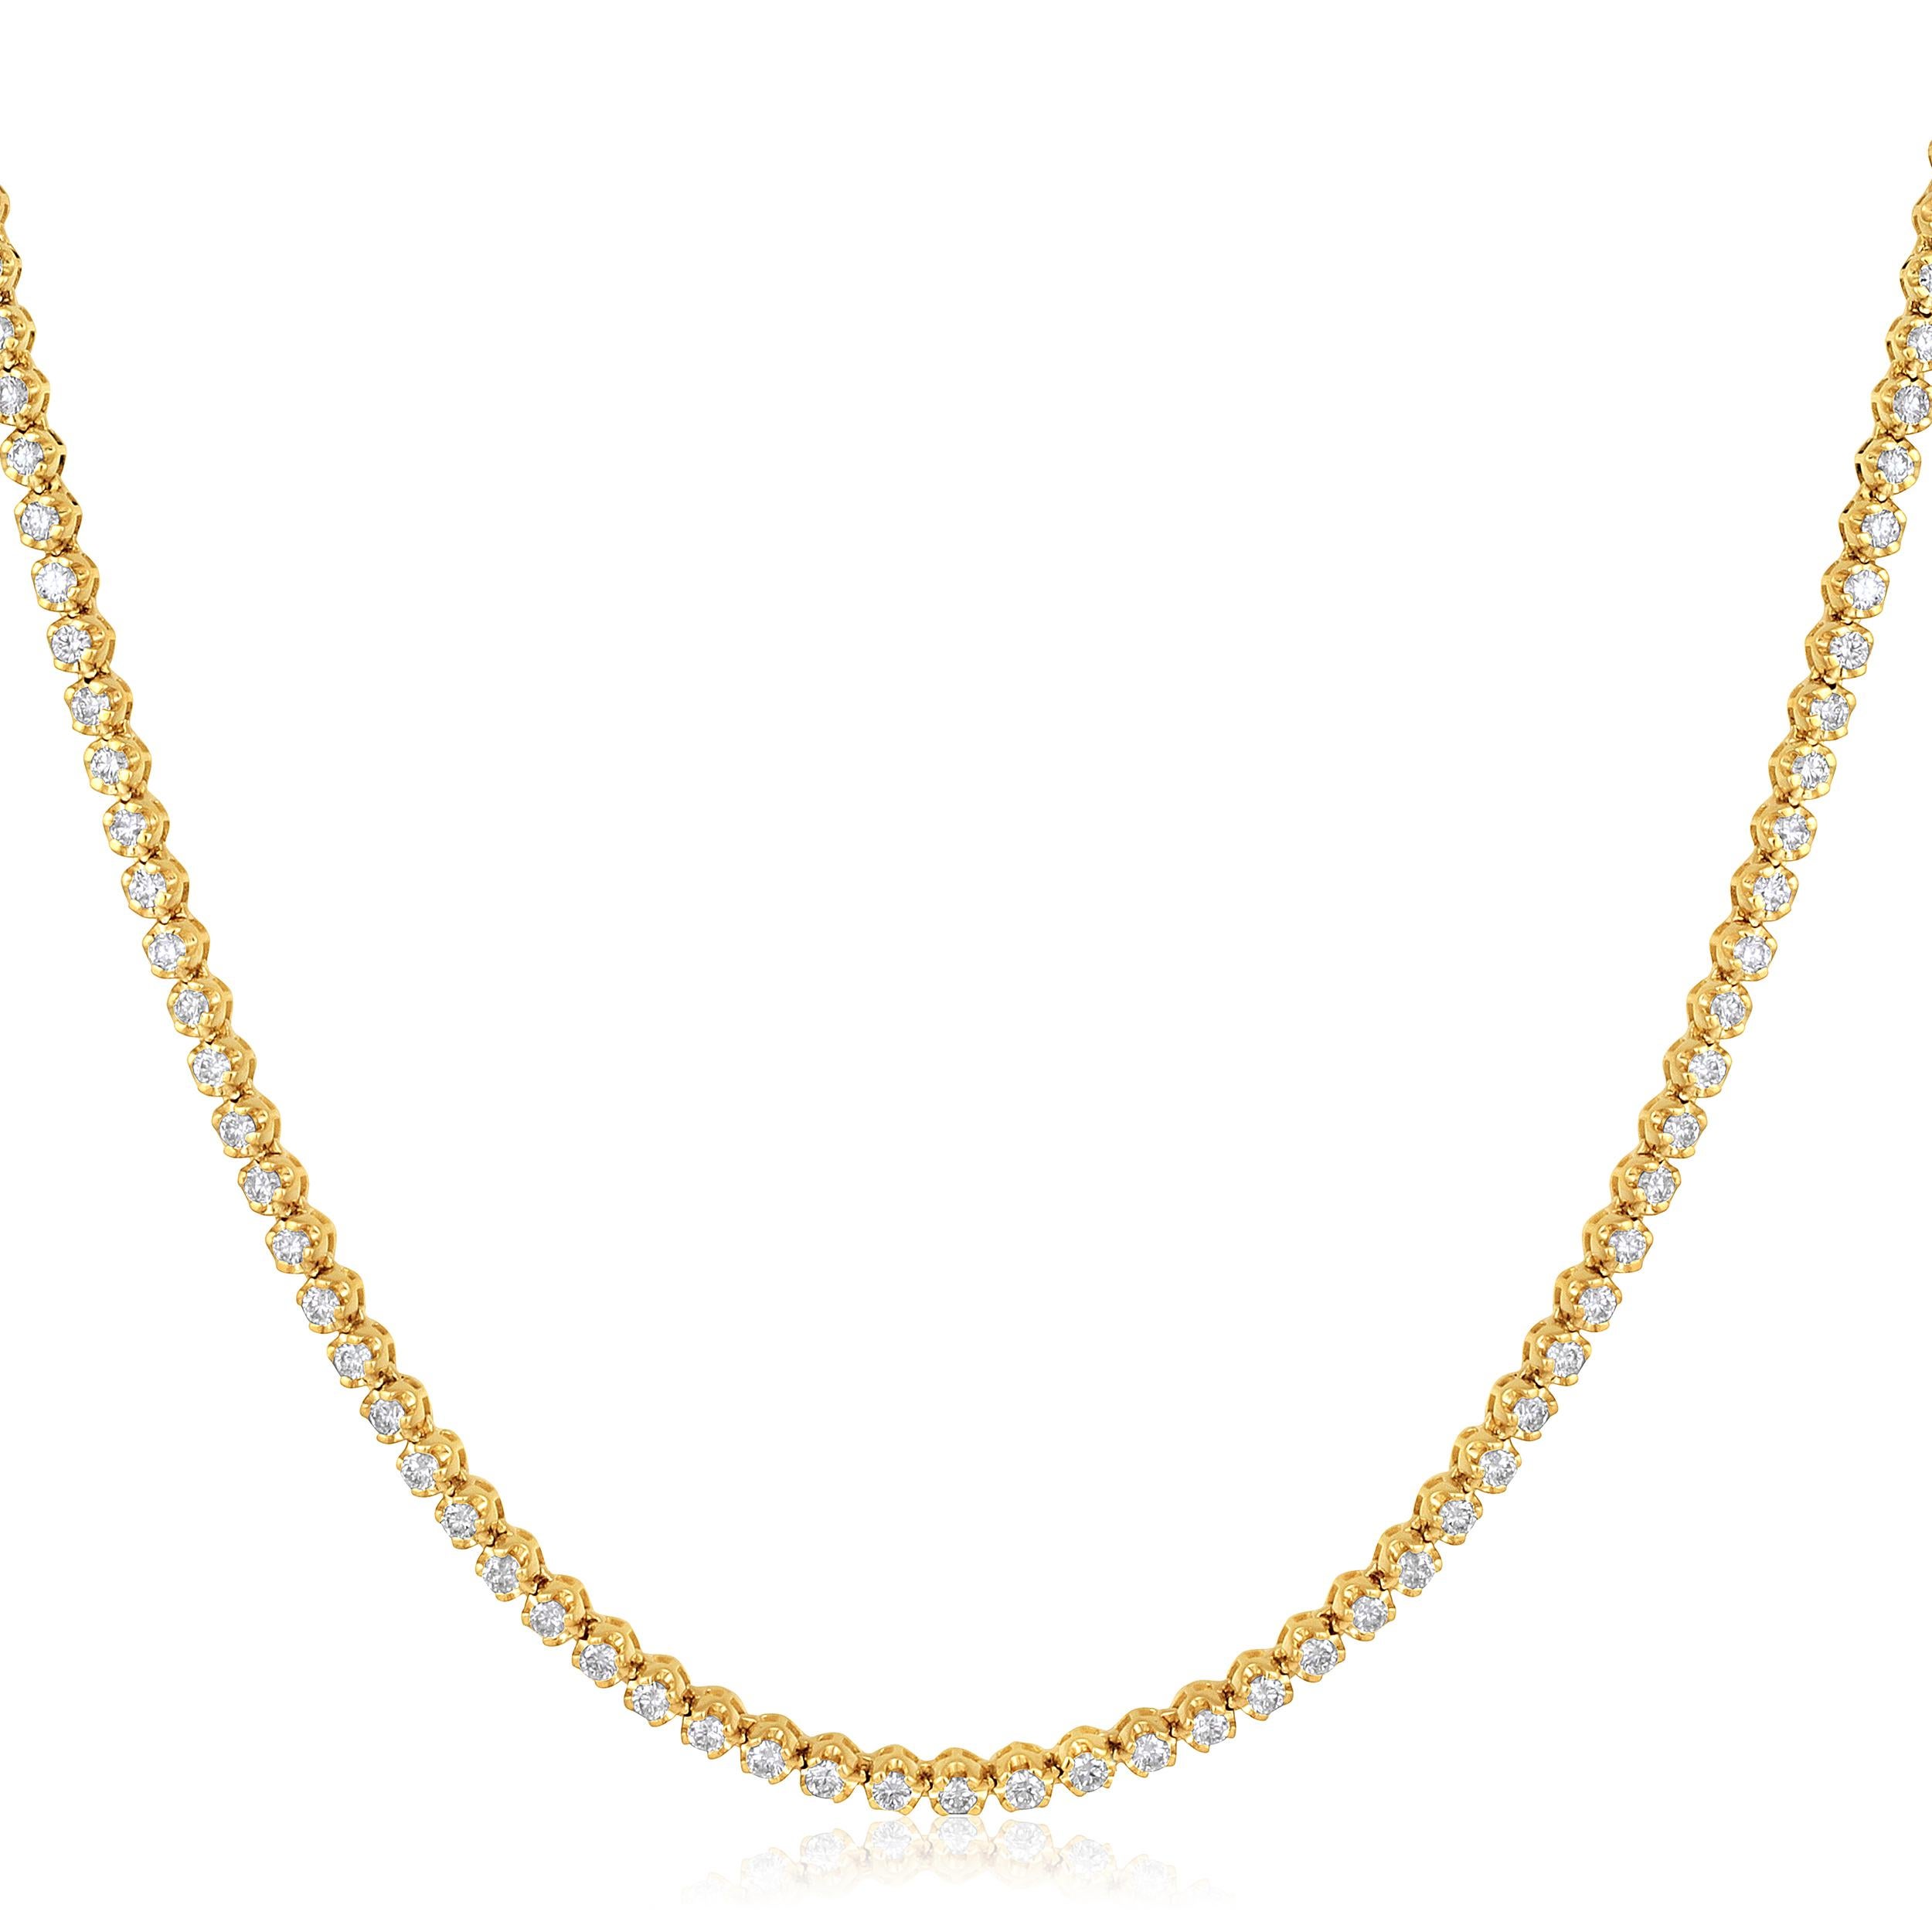 Crafted in 12.89 grams of 14K Yellow Gold, the necklace contains 122 stones of Round Natural Diamonds with a total of 3 carat in F-G color and SI clarity. The necklace length is 18 inches.

CONTEMPORARY AND TIMELESS ESSENCE: Crafted in